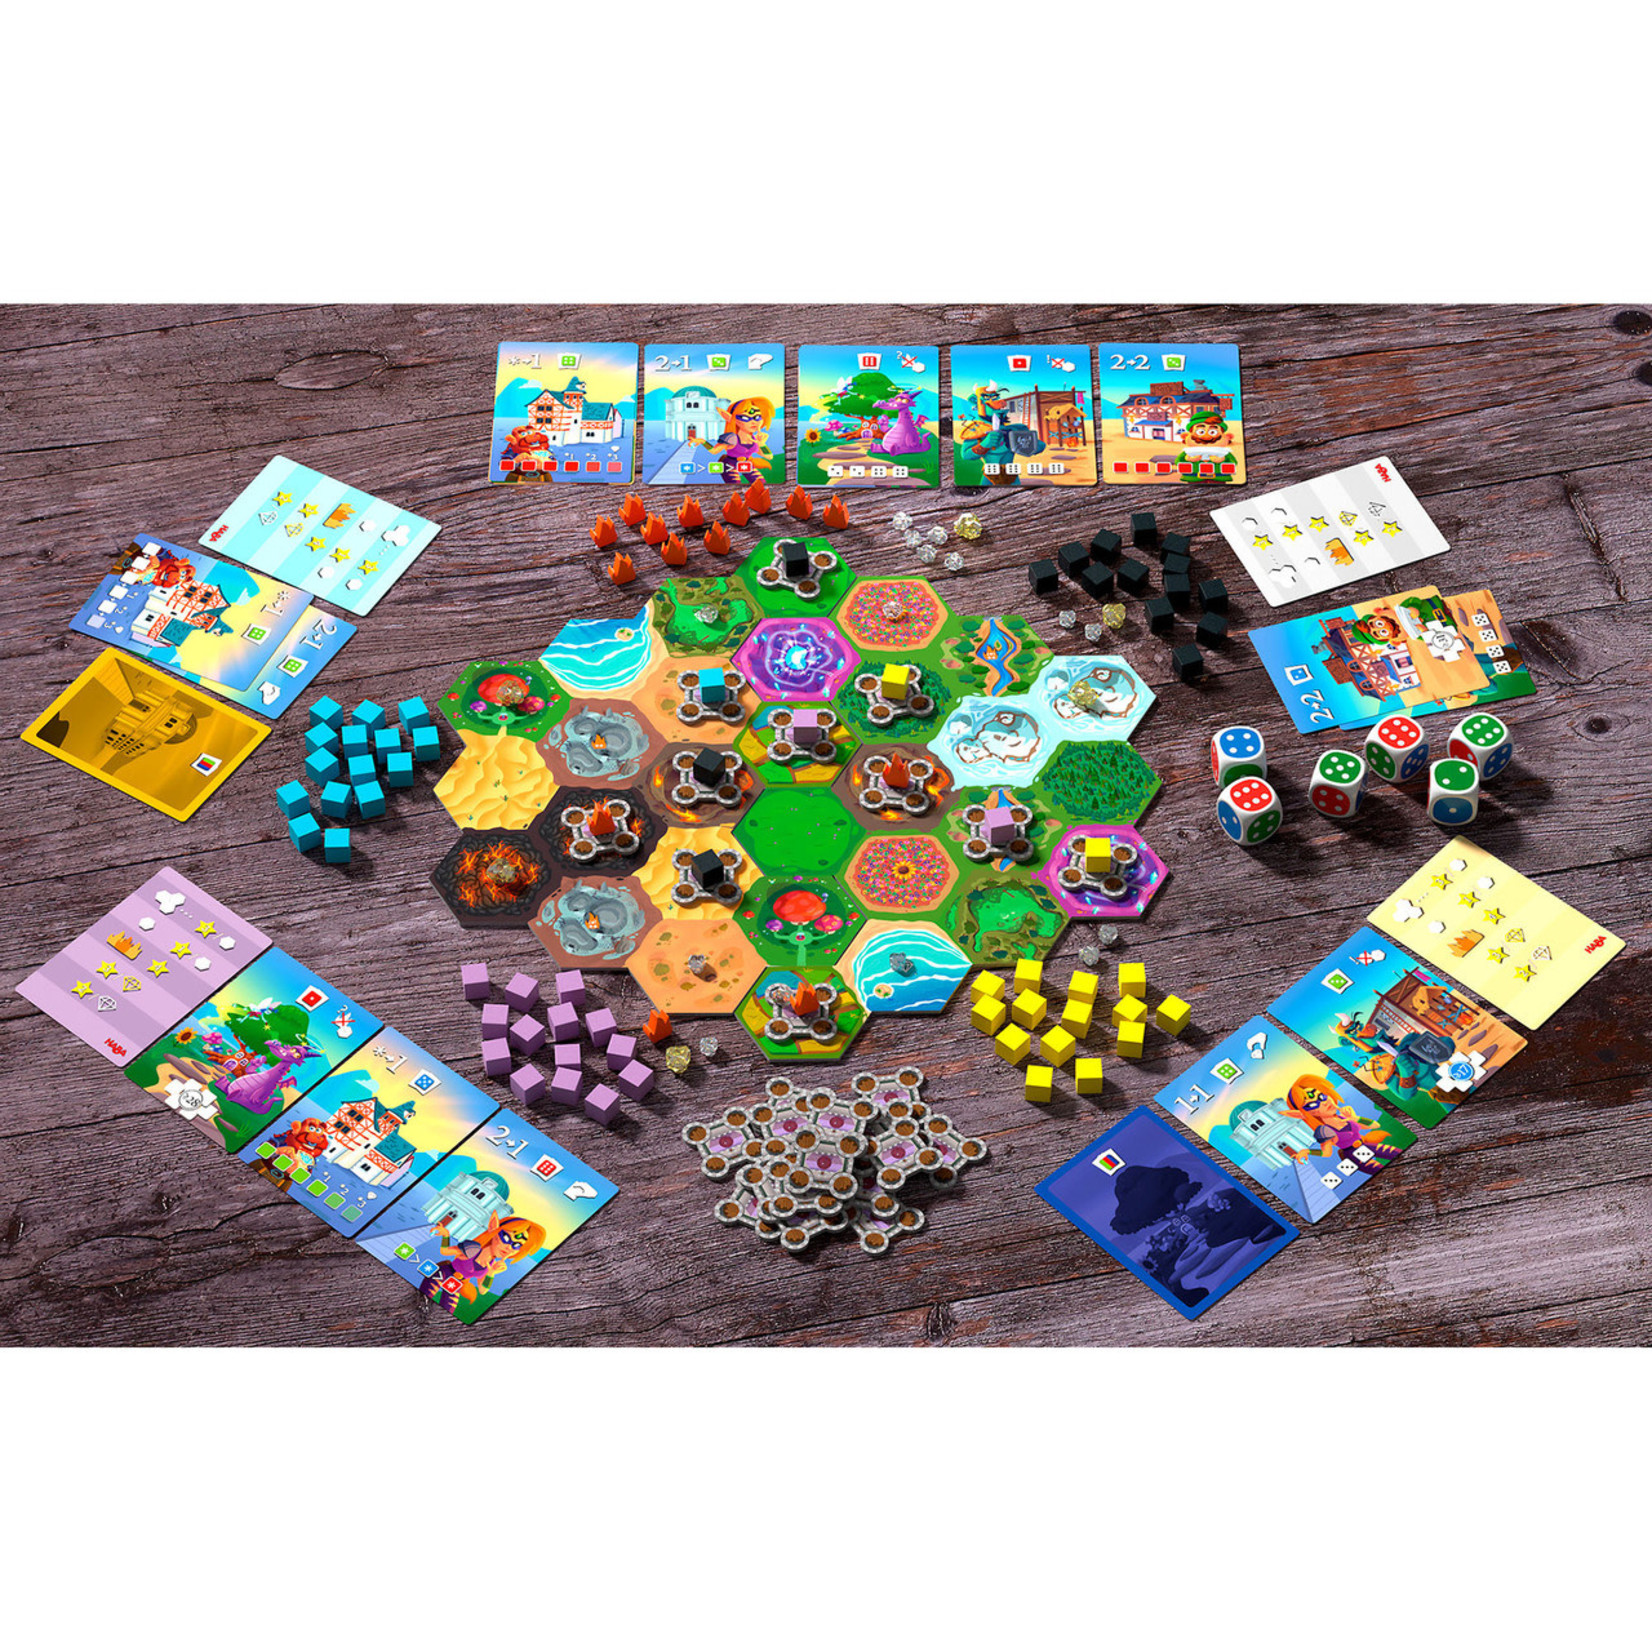 Haba King of the Dice Board Game